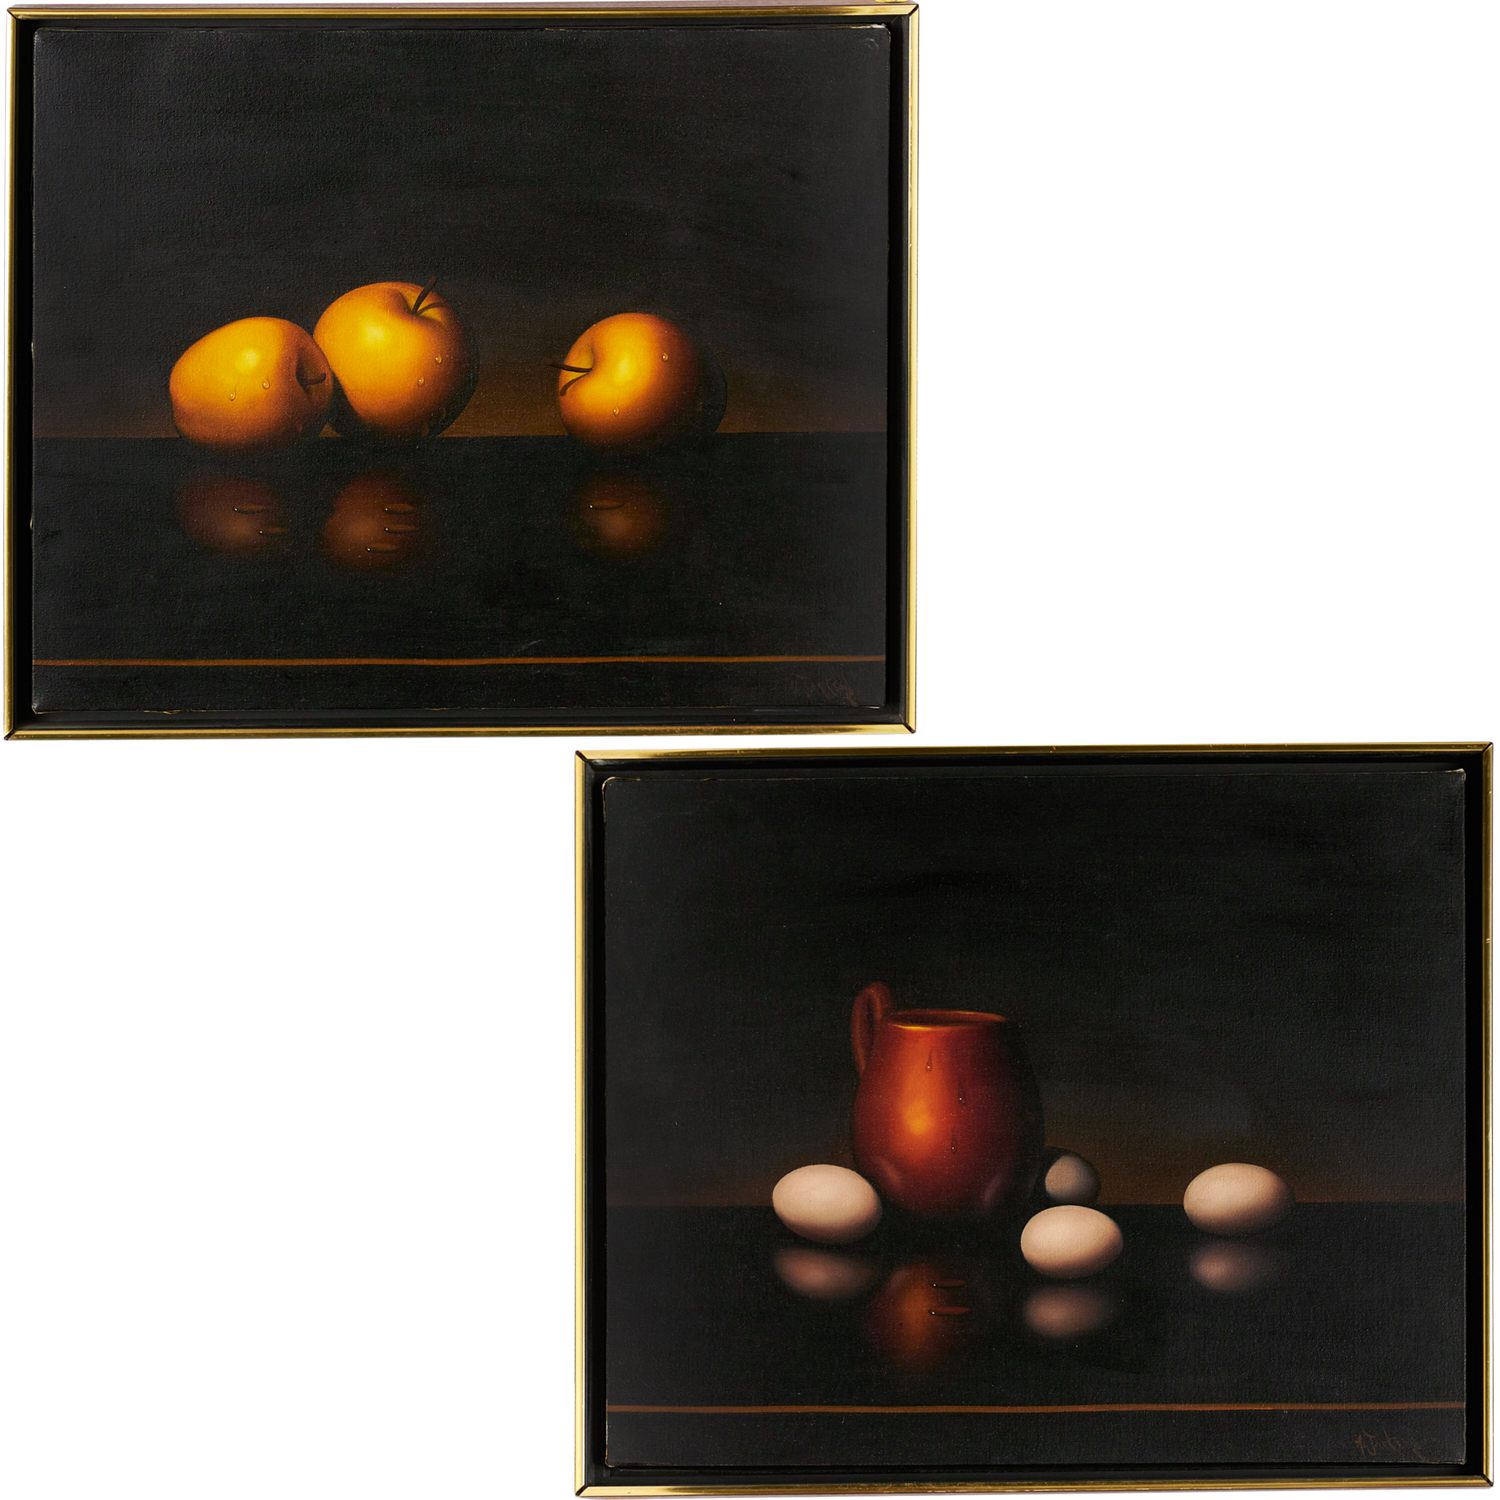 ALFRED JACKSON, PAIR OF STILL LIFE PAINTINGS